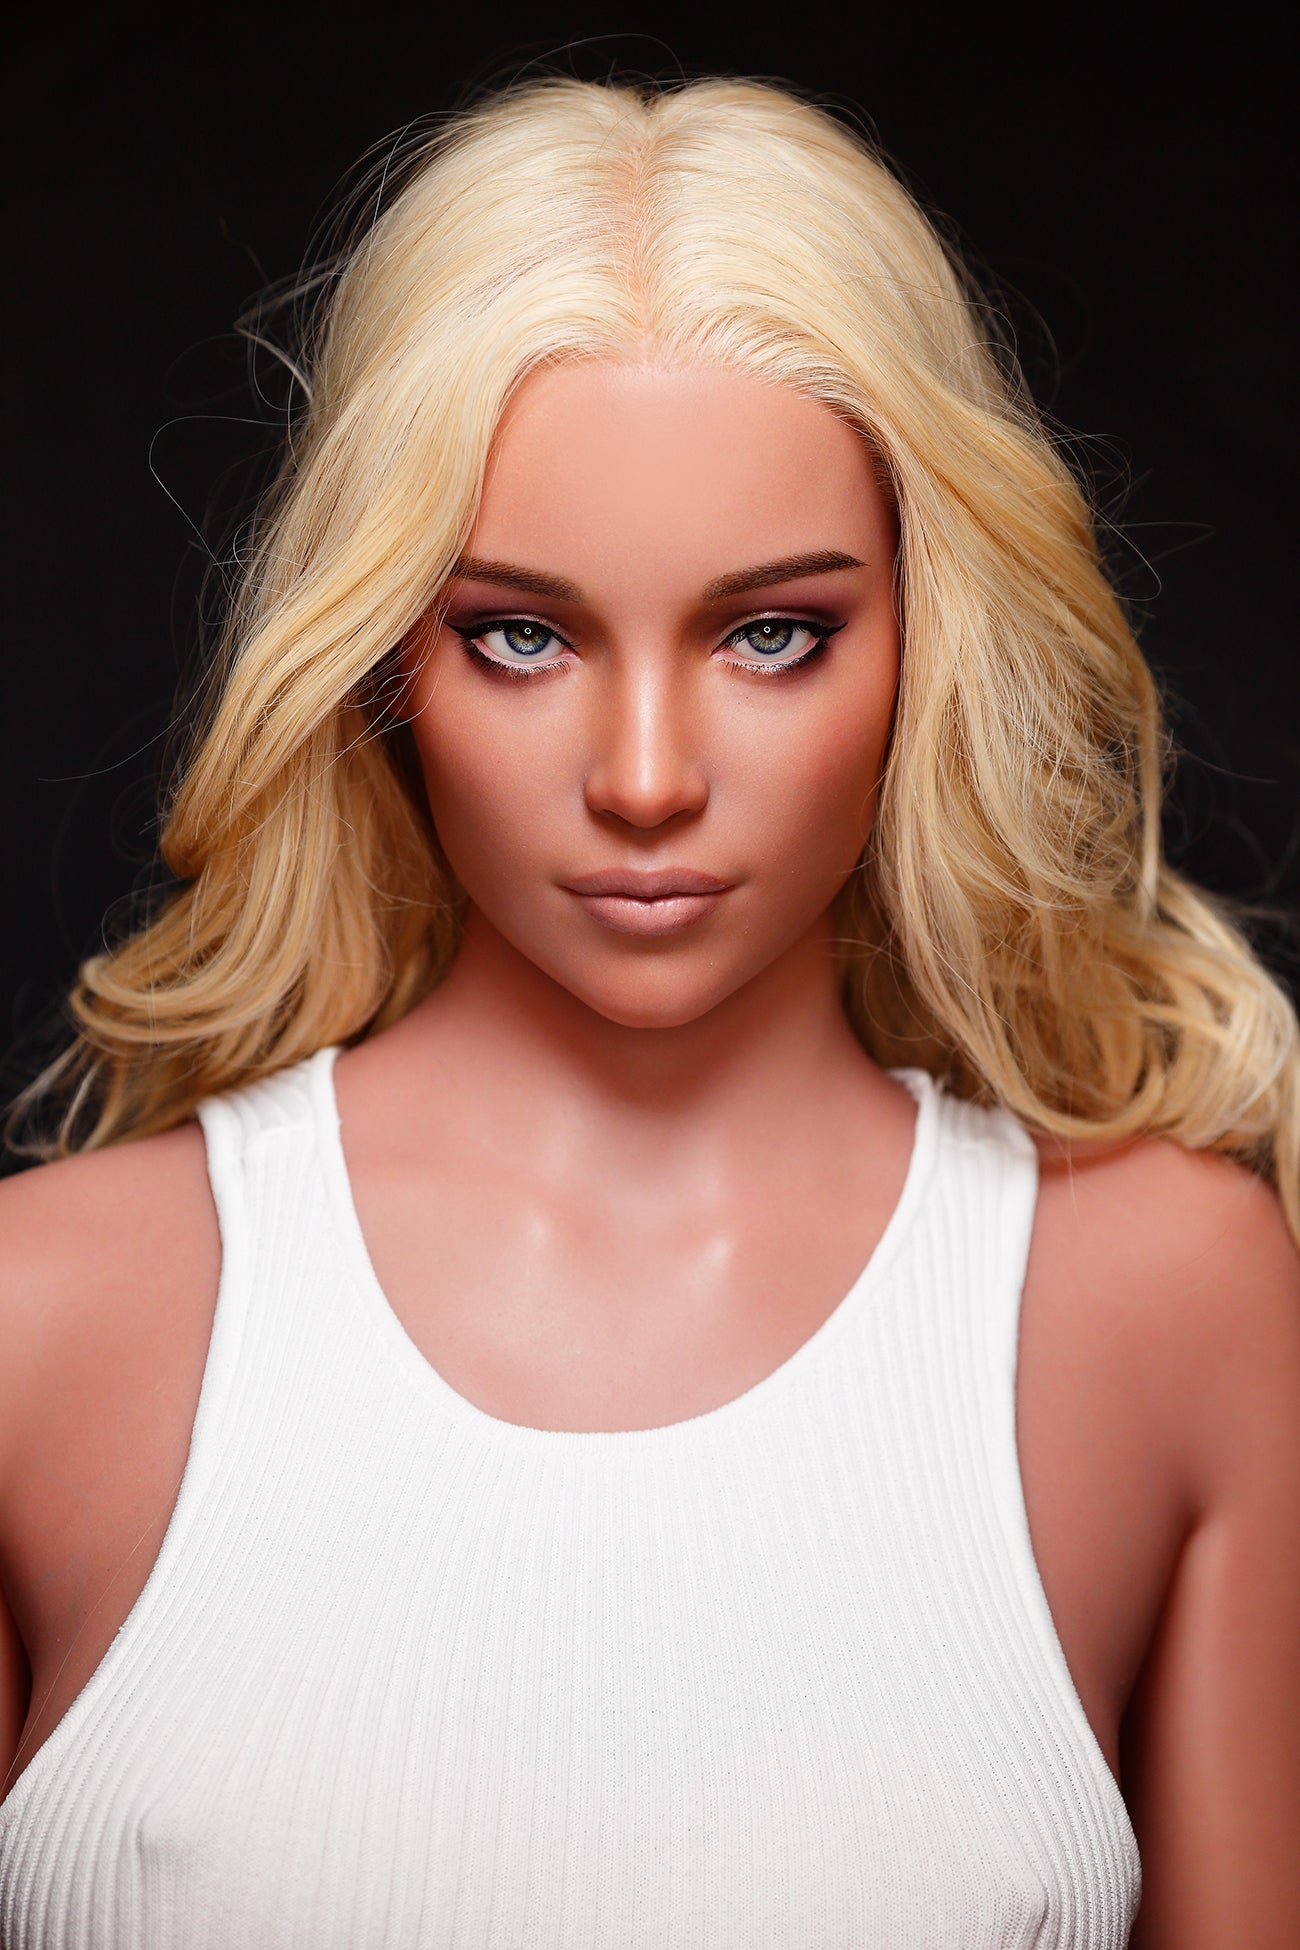 Zelex Doll 170 cm C Silicone - Daphne | Buy Sex Dolls at DOLLS ACTUALLY